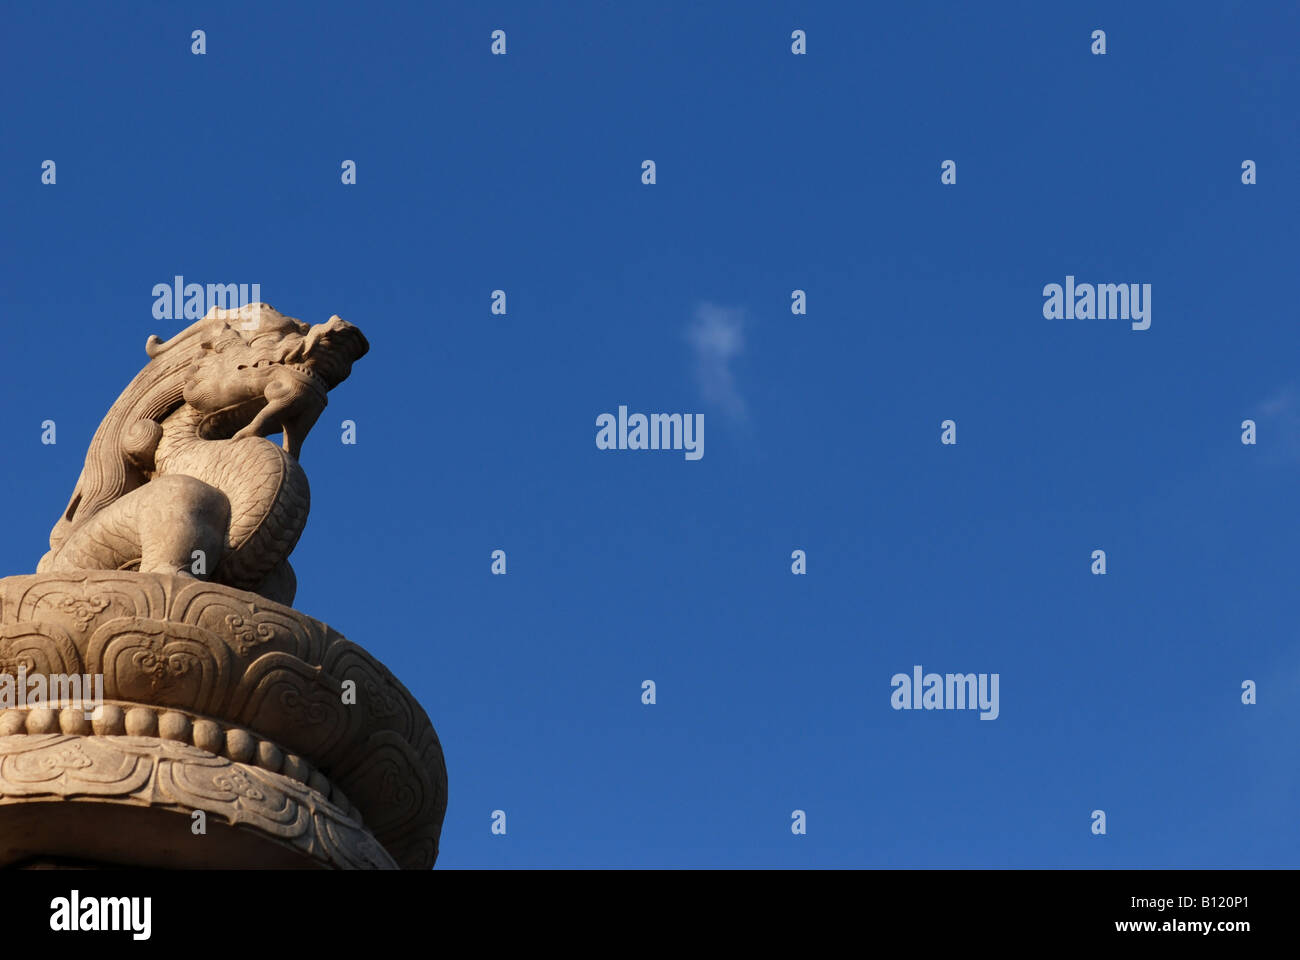 decoration column in front of  Tian'anmen square in Beijing Stock Photo